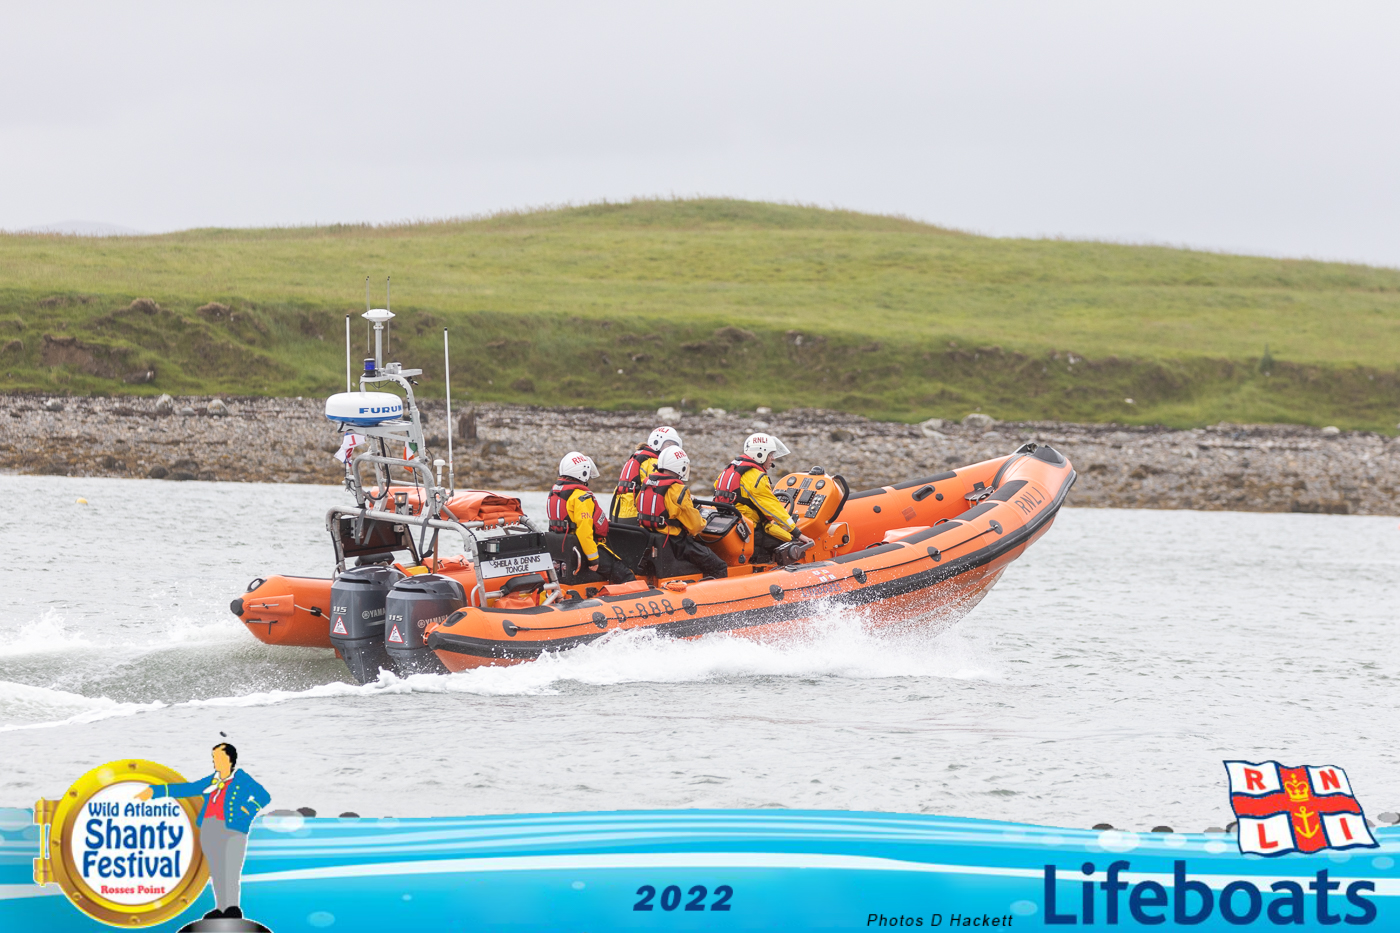 A large rubber lifeboat with crew onboard as in the water with green field in the background.